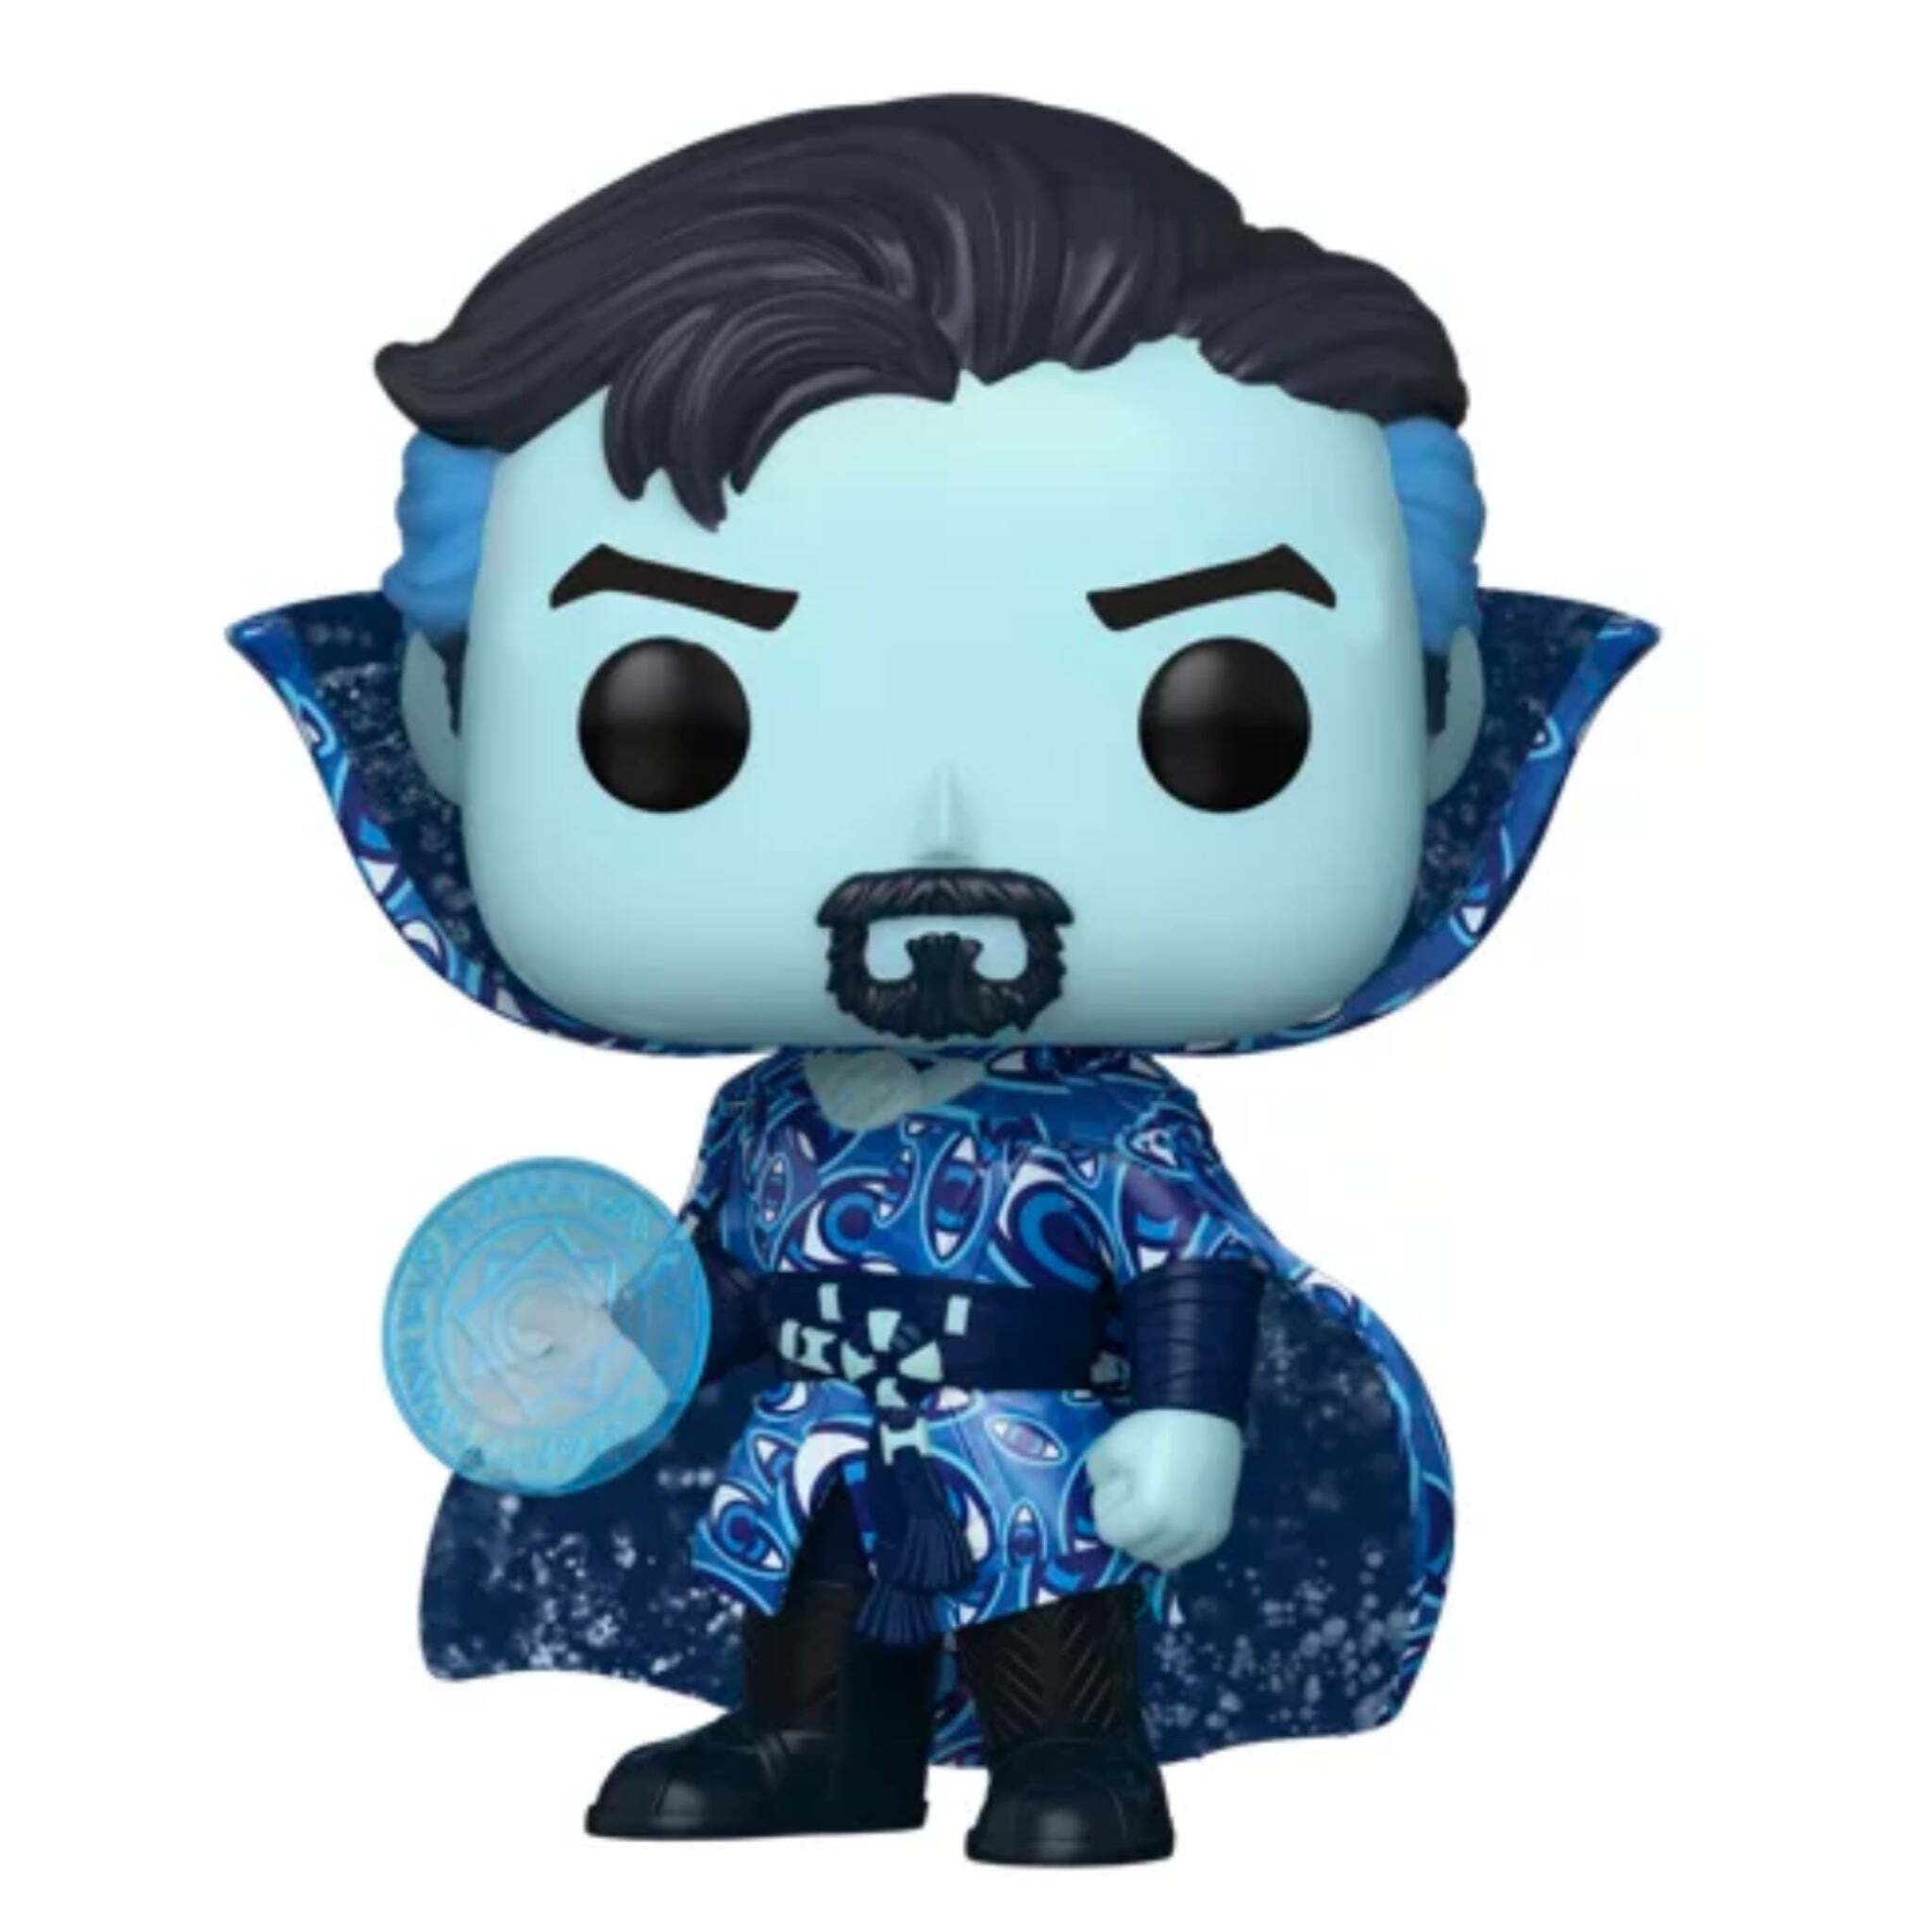 Doctor Strange (Multiverse of Madness) Funko Pop! CHASE